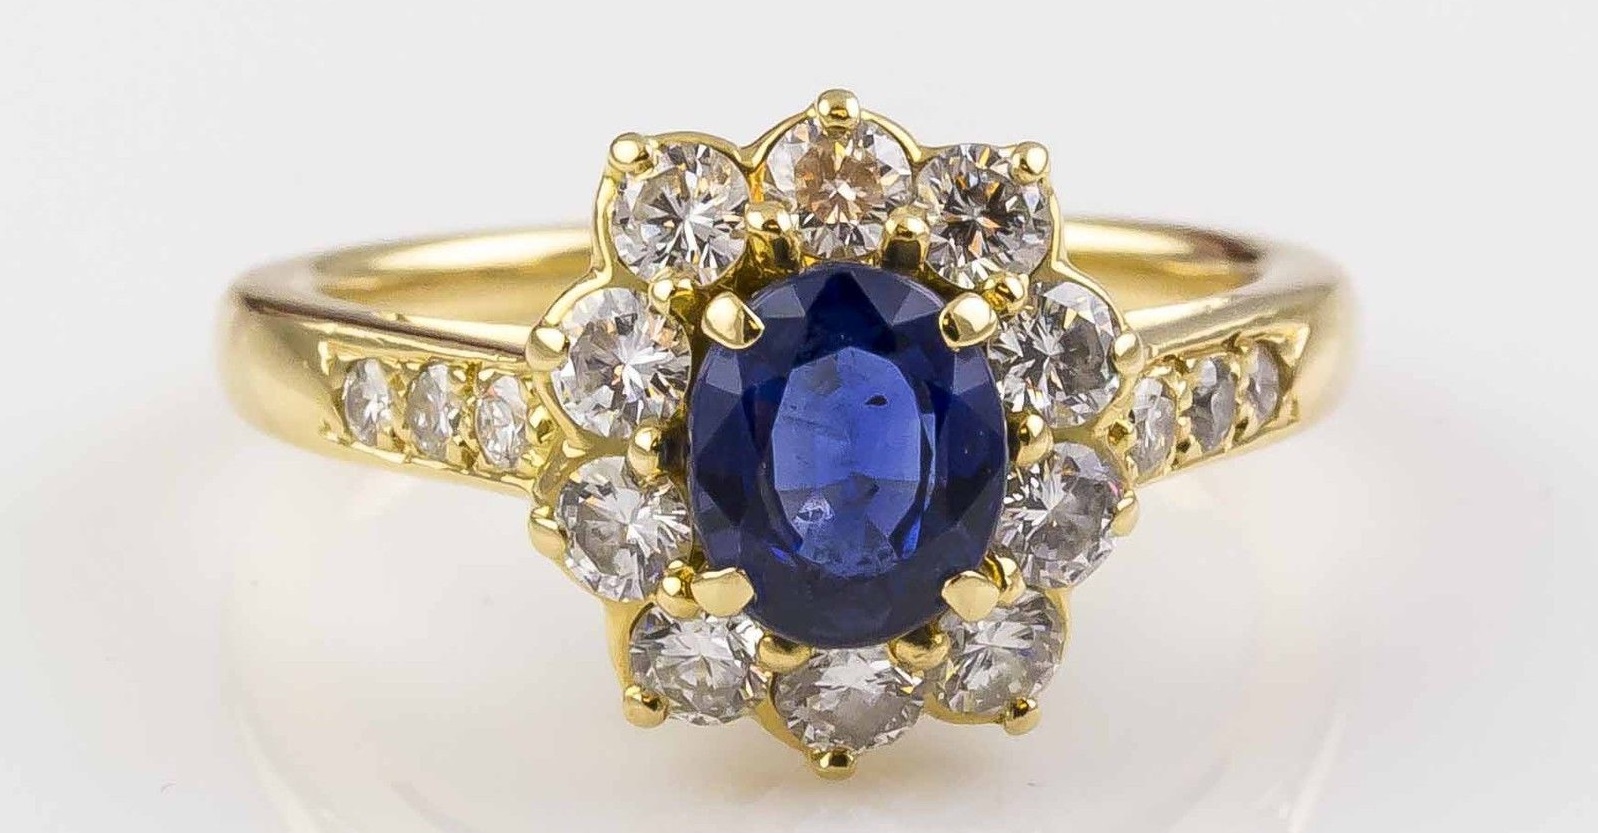 Charming and elegant 18K yellow gold, sapphire and diamond cocktail ring by Cartier. 